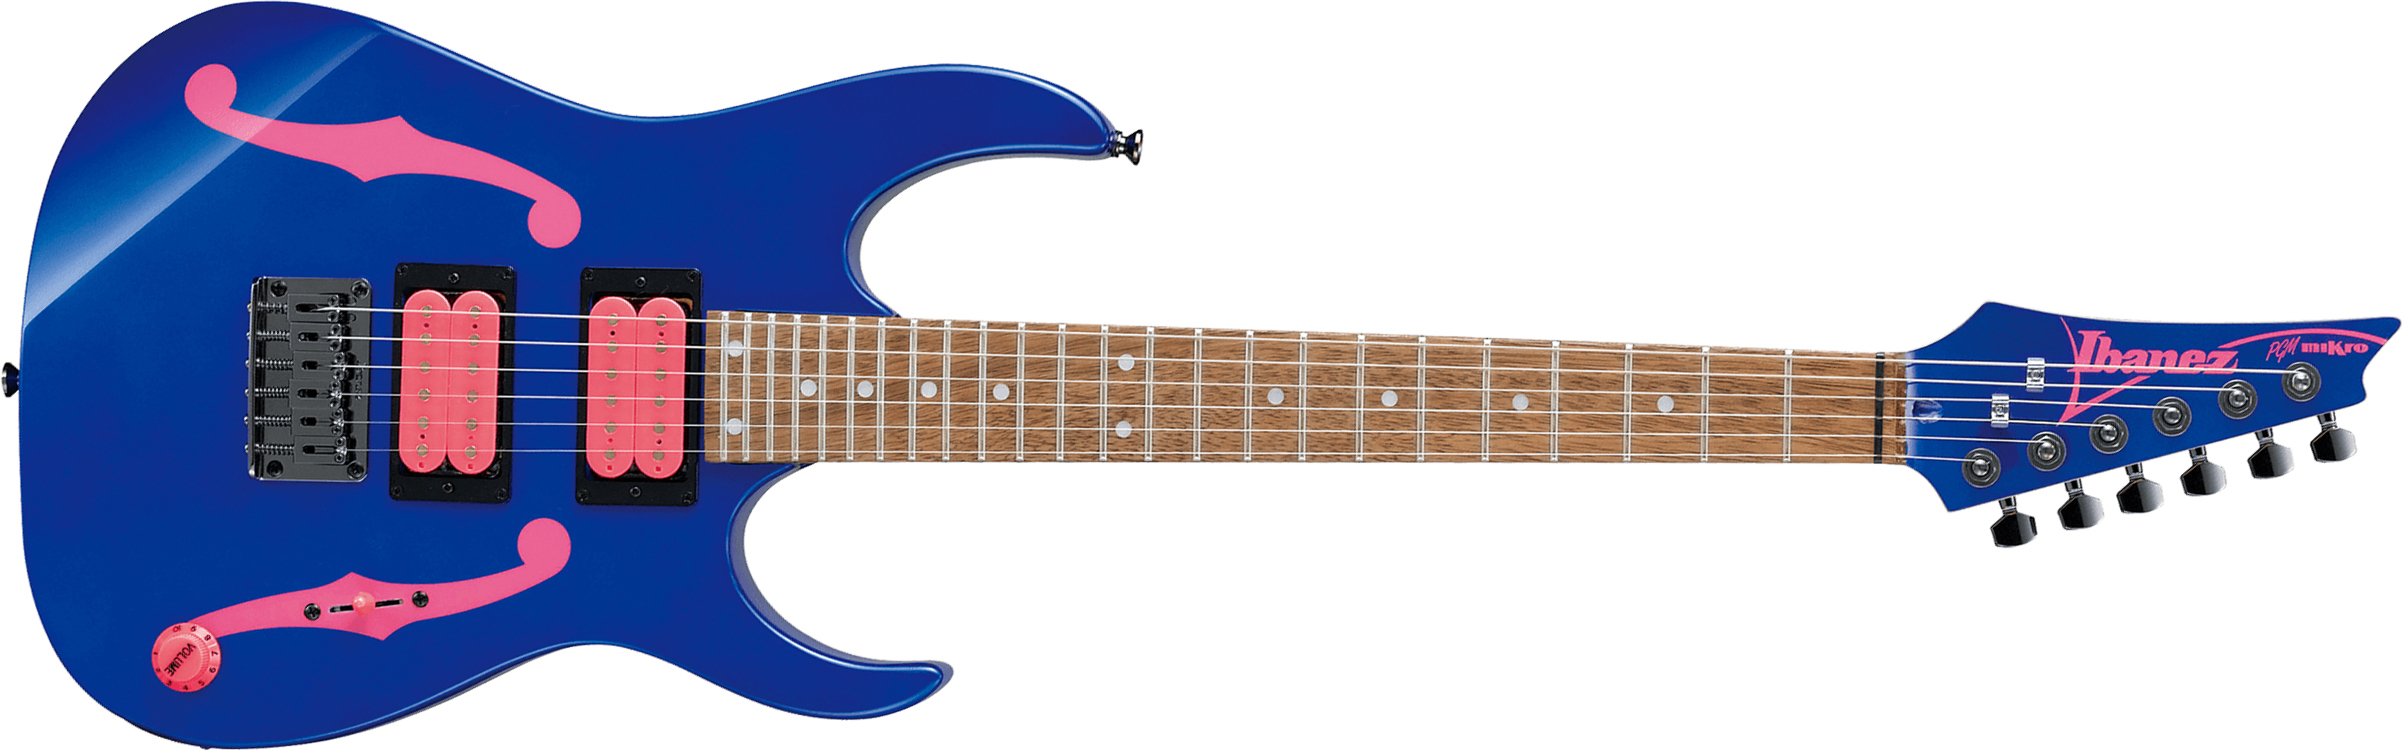 Ibanez Paul Gilbert Pgmm11 Jb Signature 3/4 Hh Ht Jat - Jewel Blue - Electric guitar for kids - Main picture